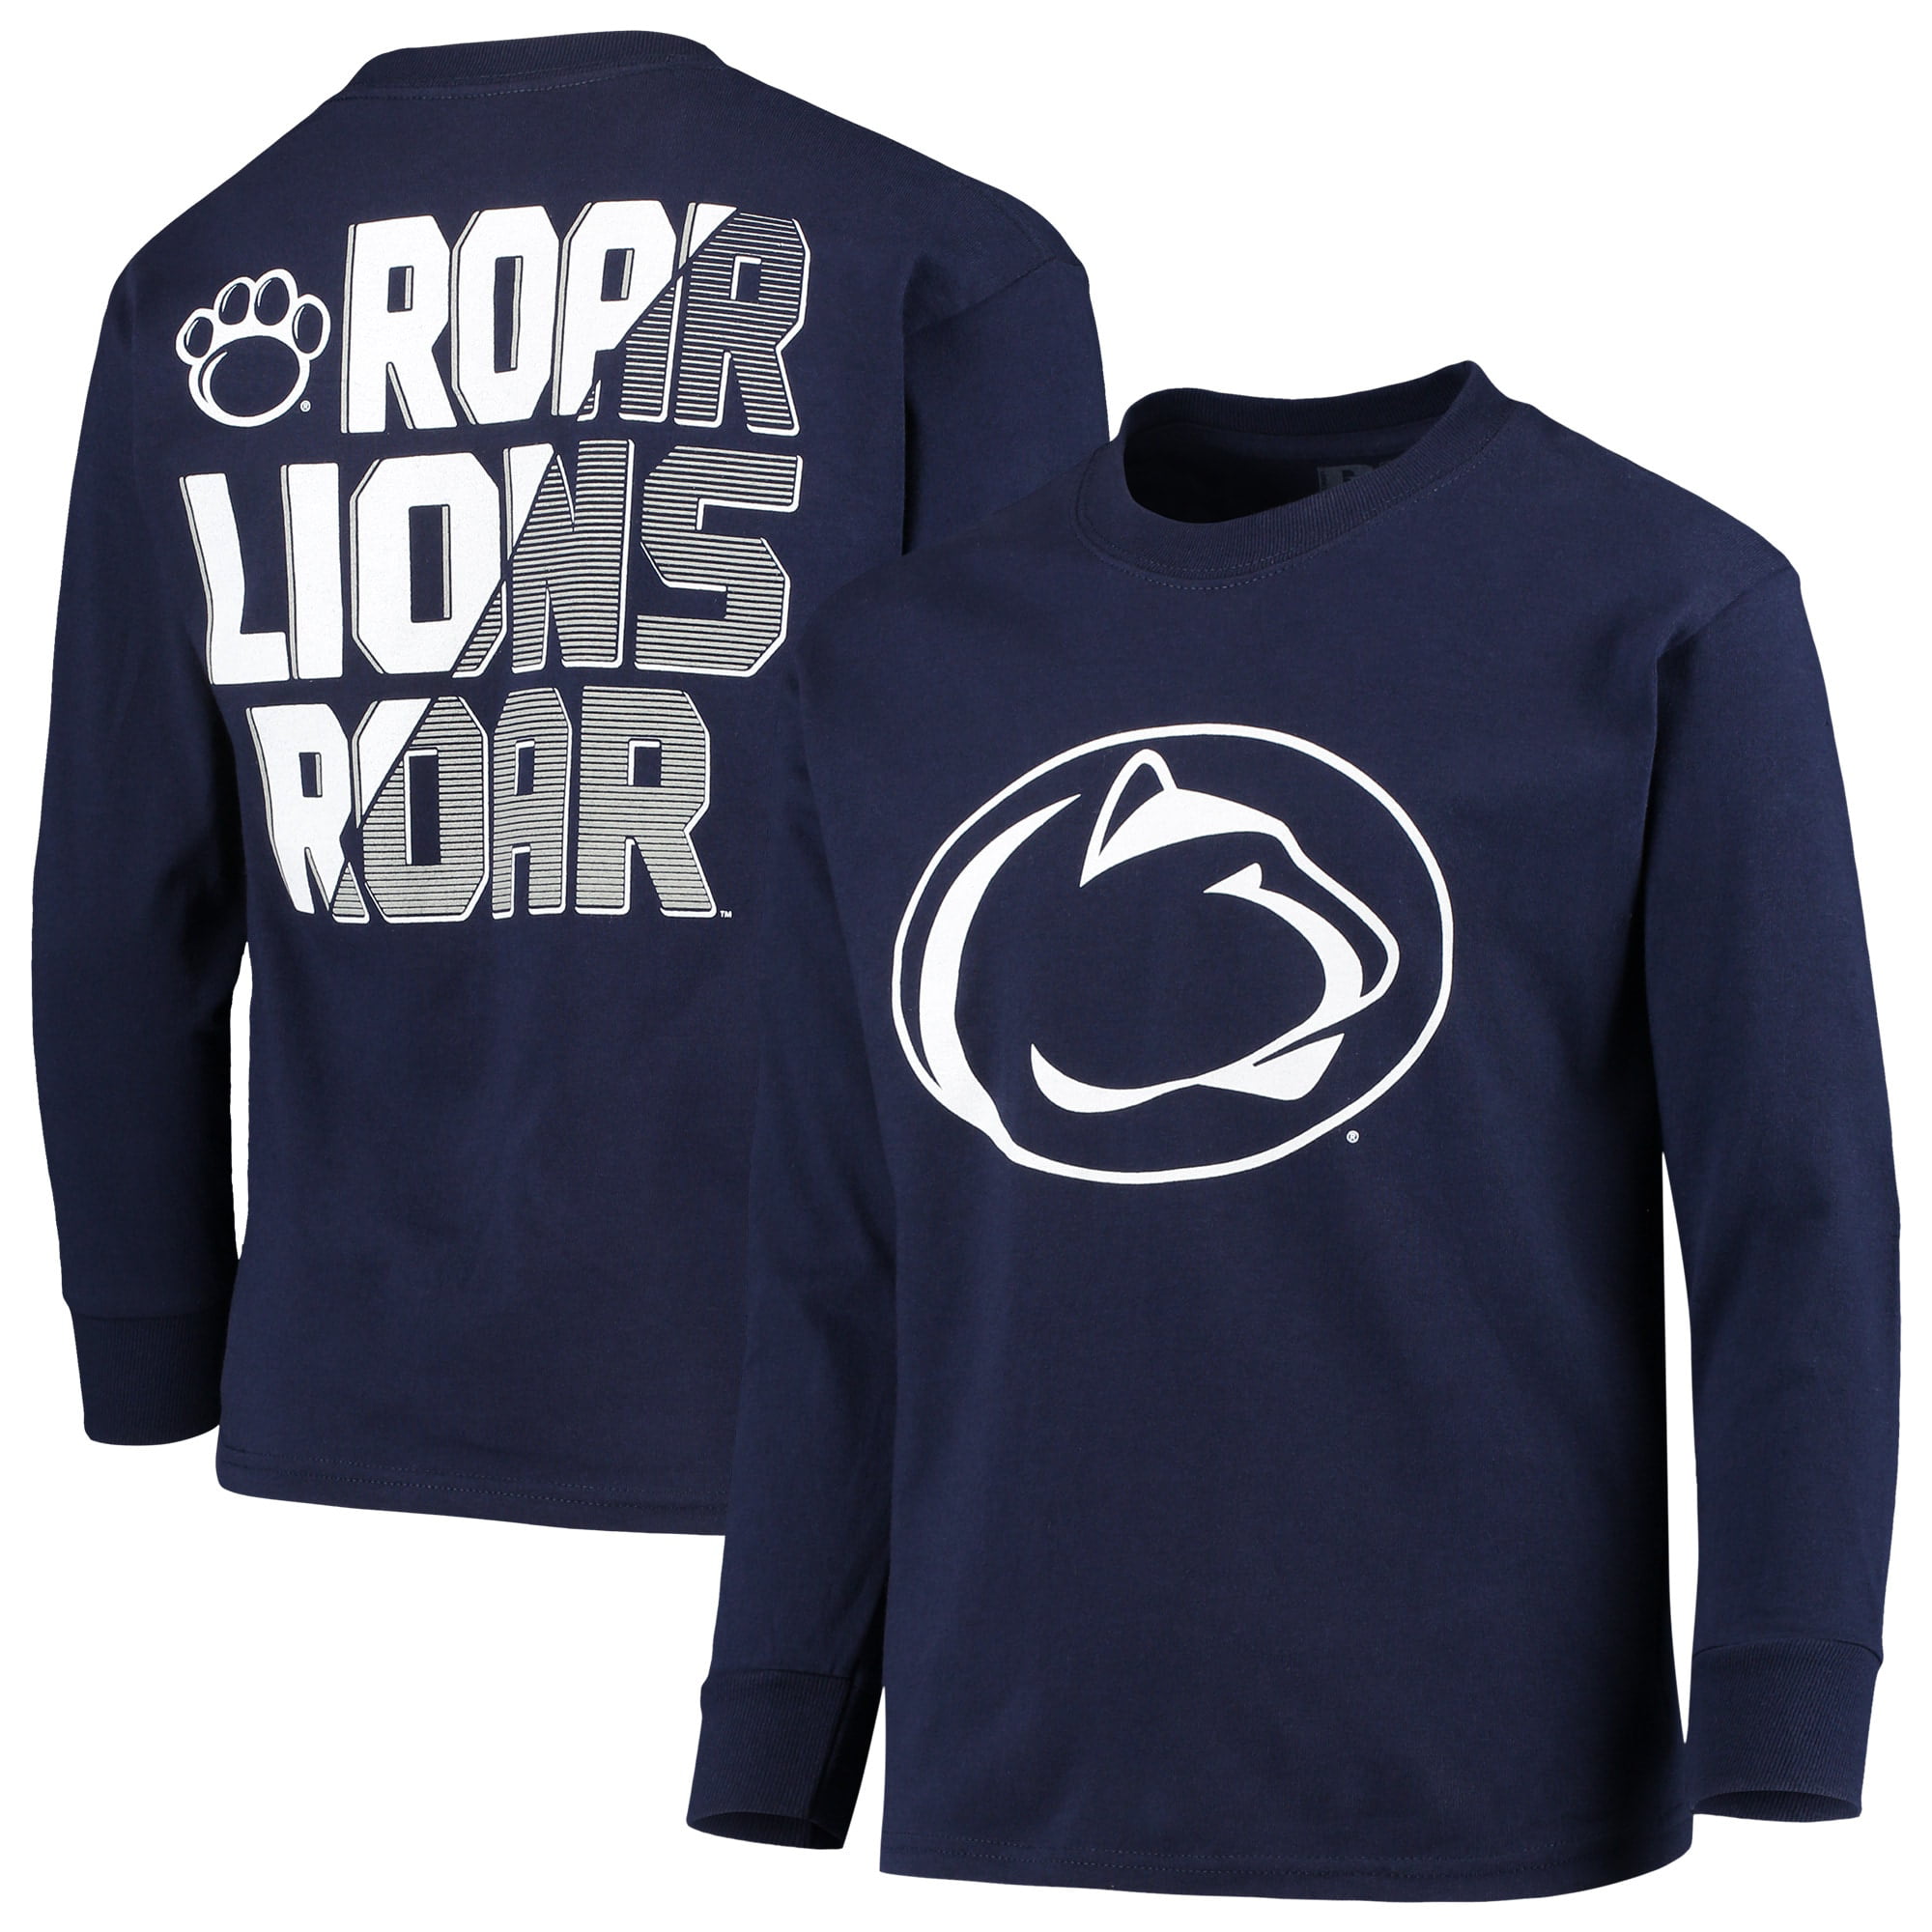 Future Tailgater Penn State Nittany Lions Personalized Color Baby/Toddler T-Shirt